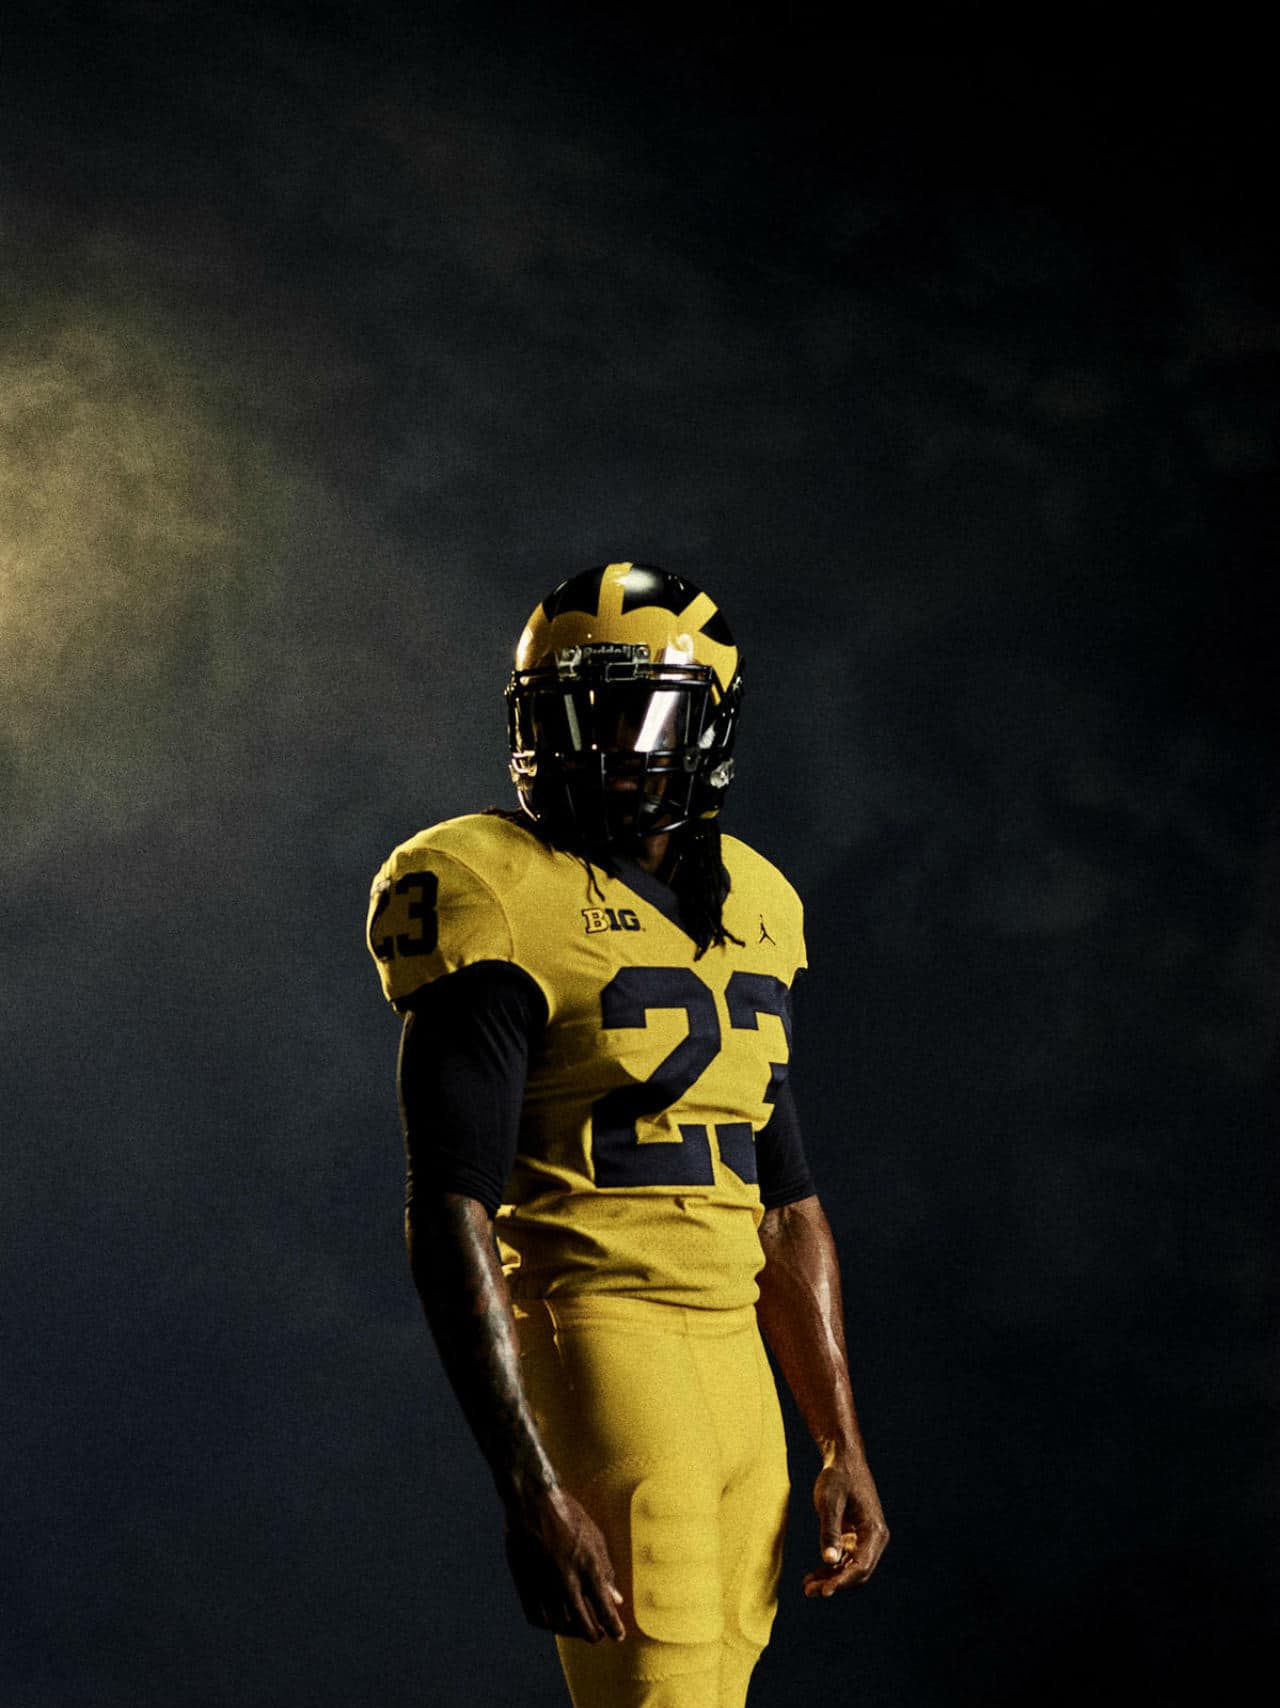 LOOK: Florida and Michigan Nike color rush jerseys unveiled for